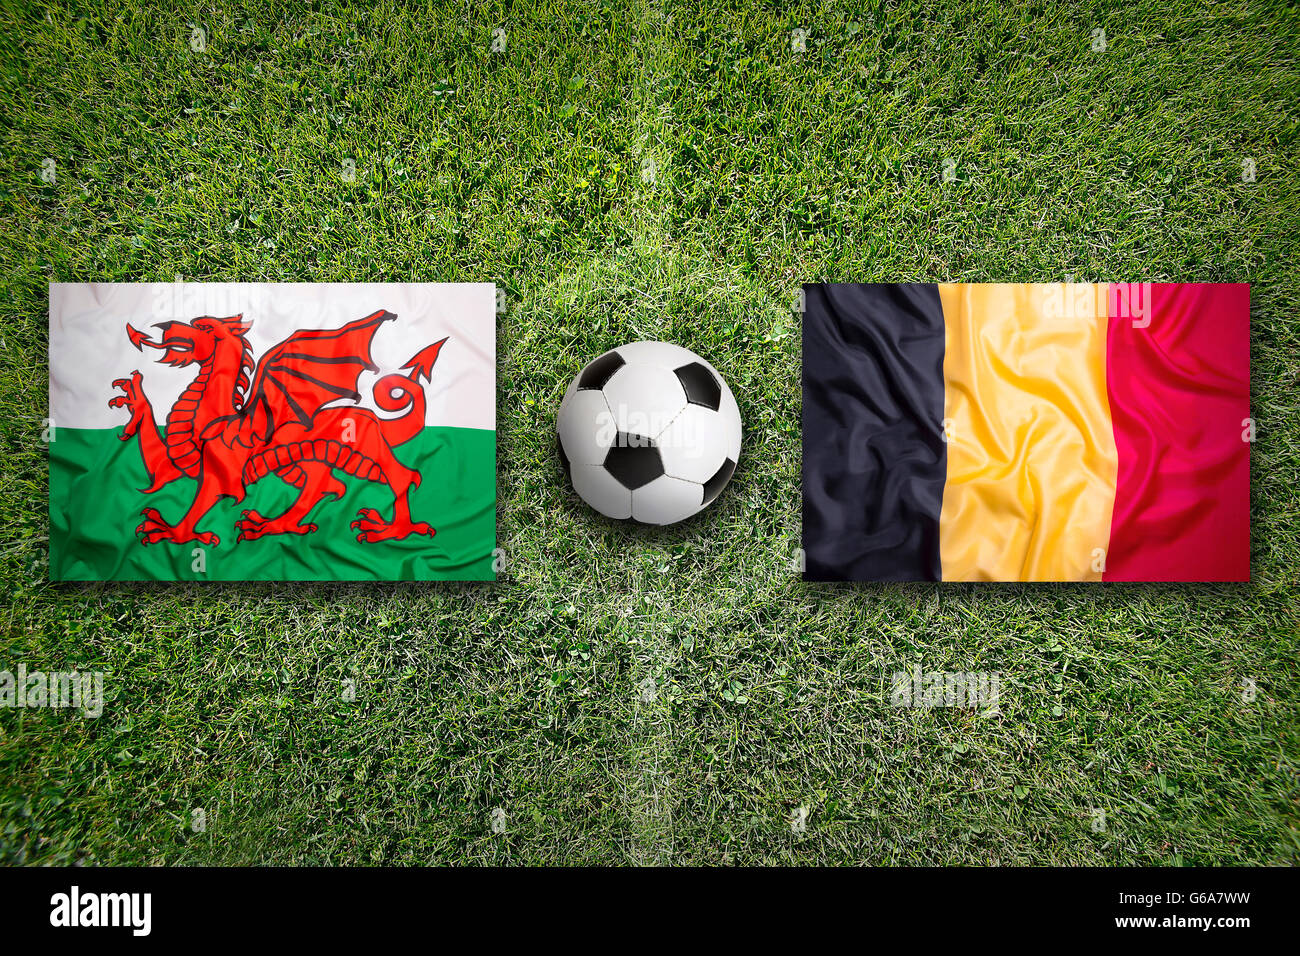 Wales vs. Belgium flags on green soccer field Stock Photo